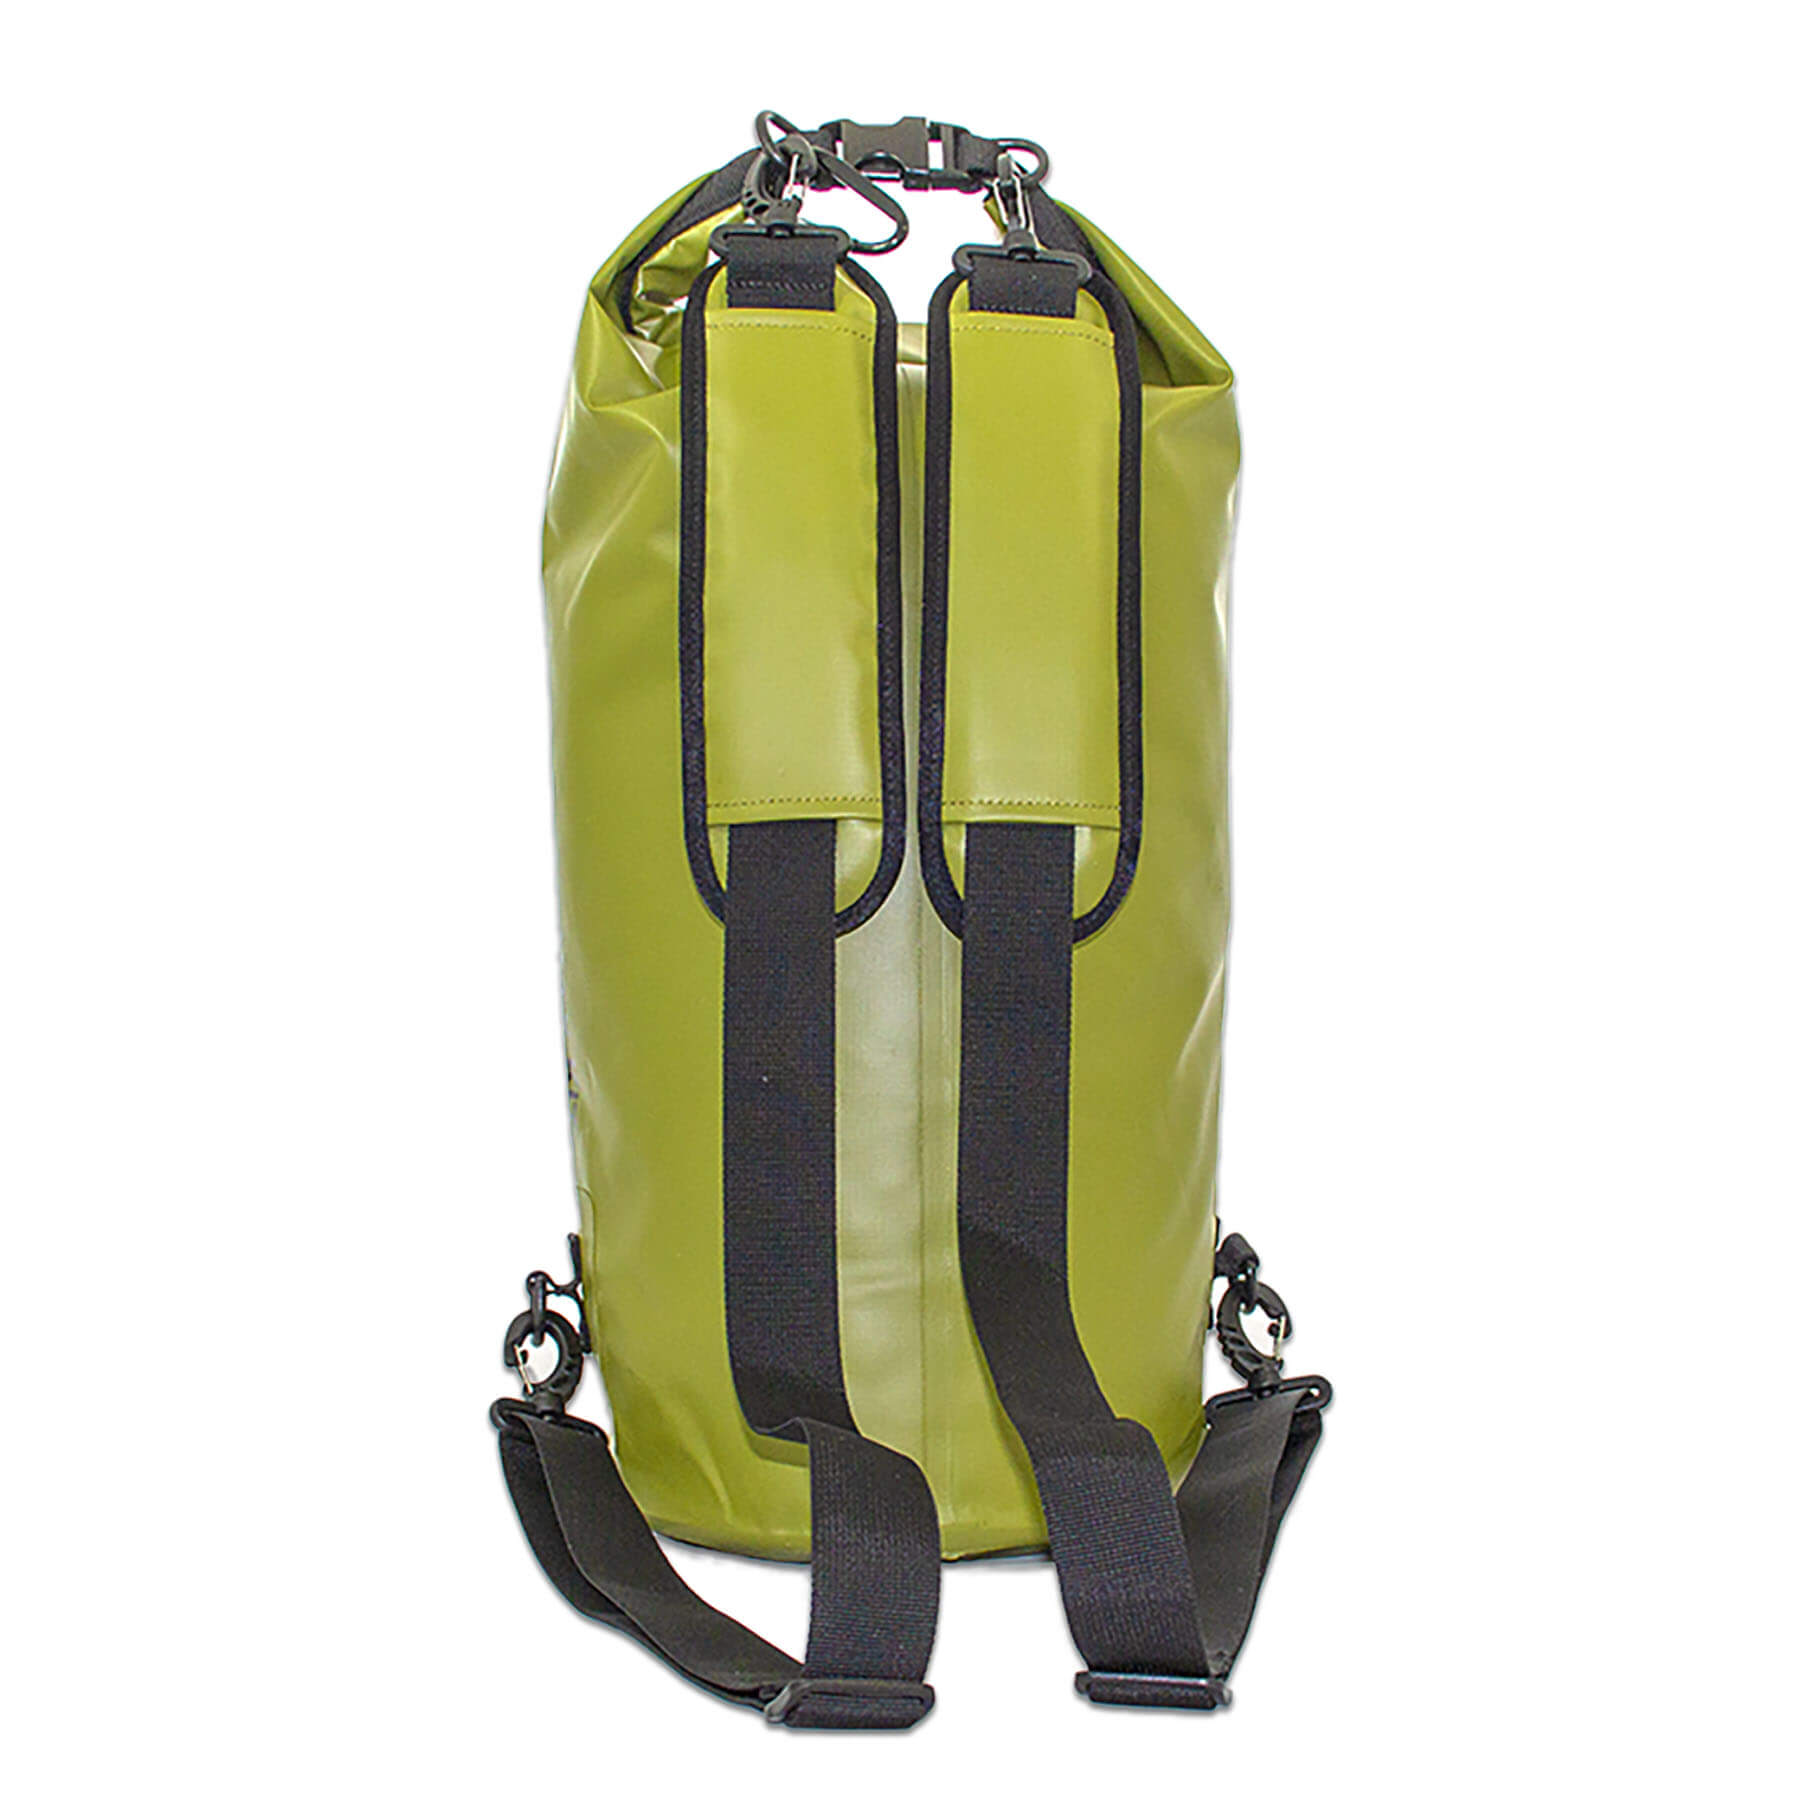 waterproof dry bag 20 litres with detachable comfort straps, D rings and handle in an olive green colour back view 